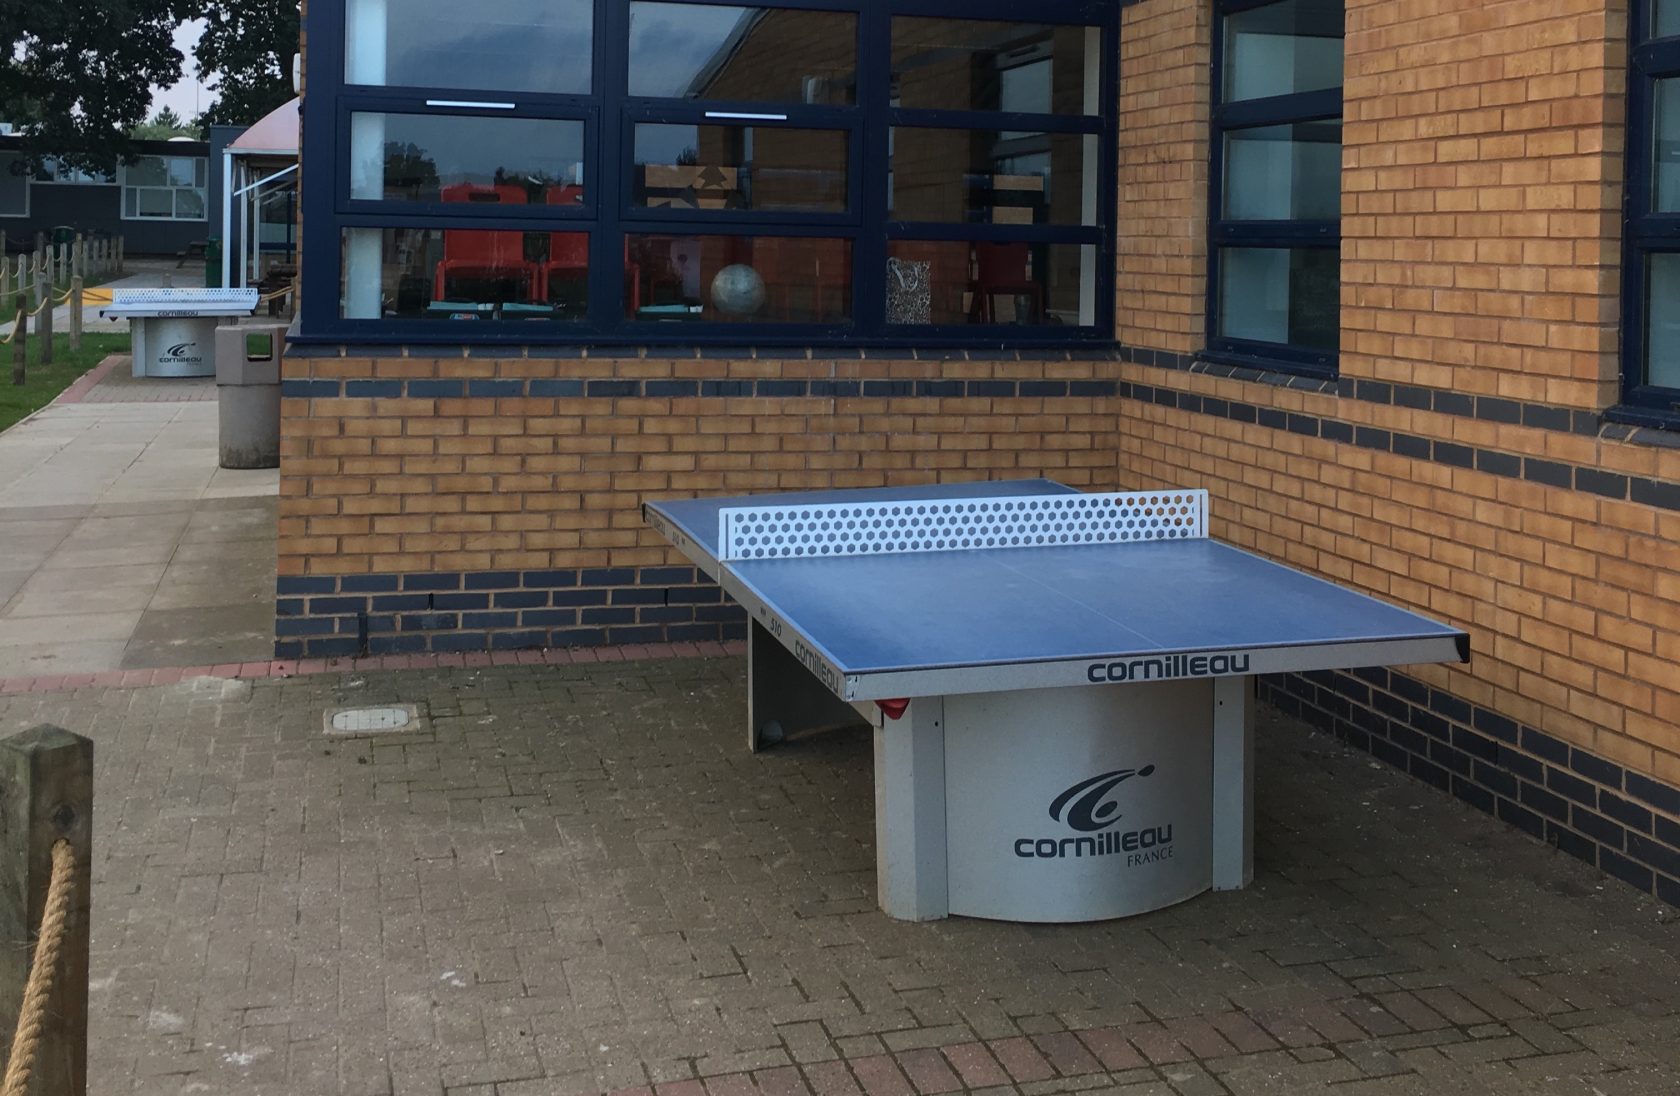 Anyone for Table Tennis?